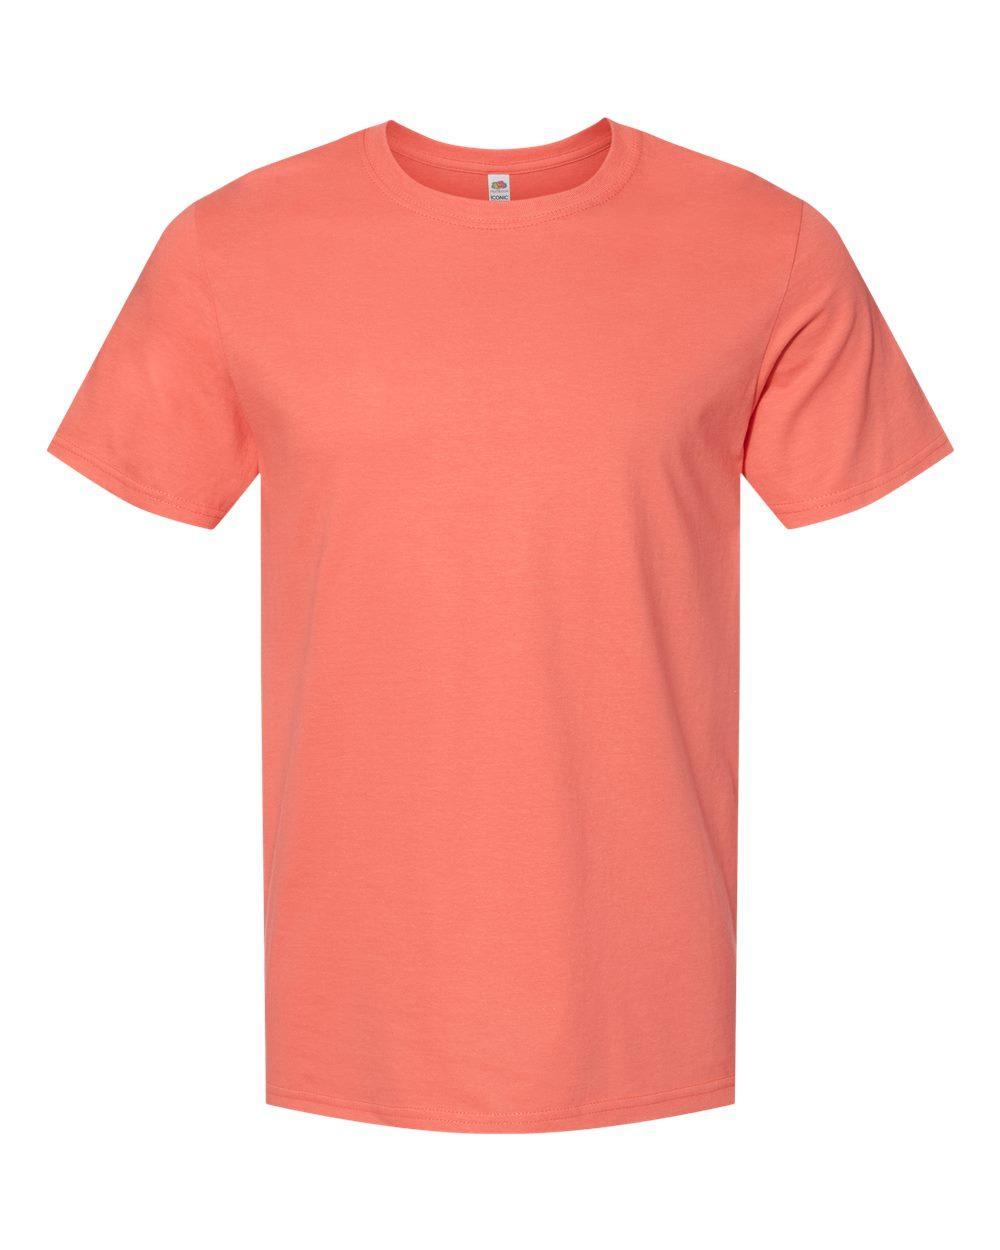 Blank Iconic Supercotton T-Shirt - Constantly Create Shop